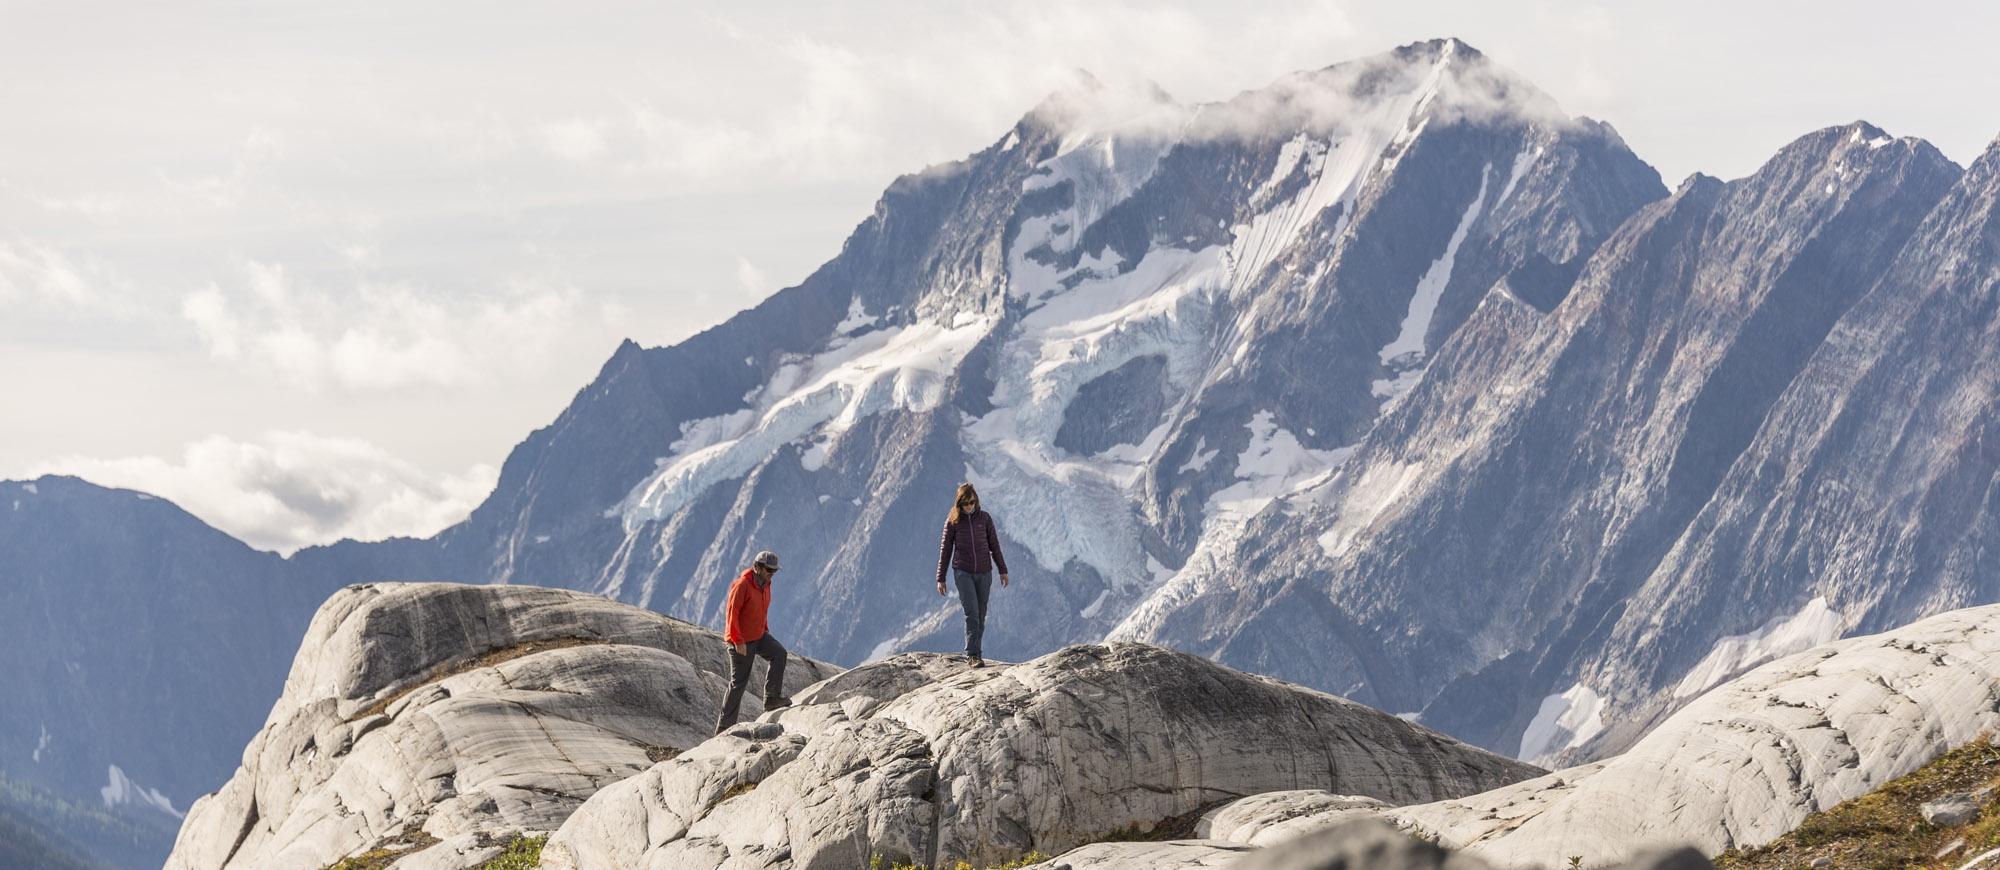 Two hikers at MacBeth Icefield in the Purcell Mountains near Nelson and Kaslo, BC.